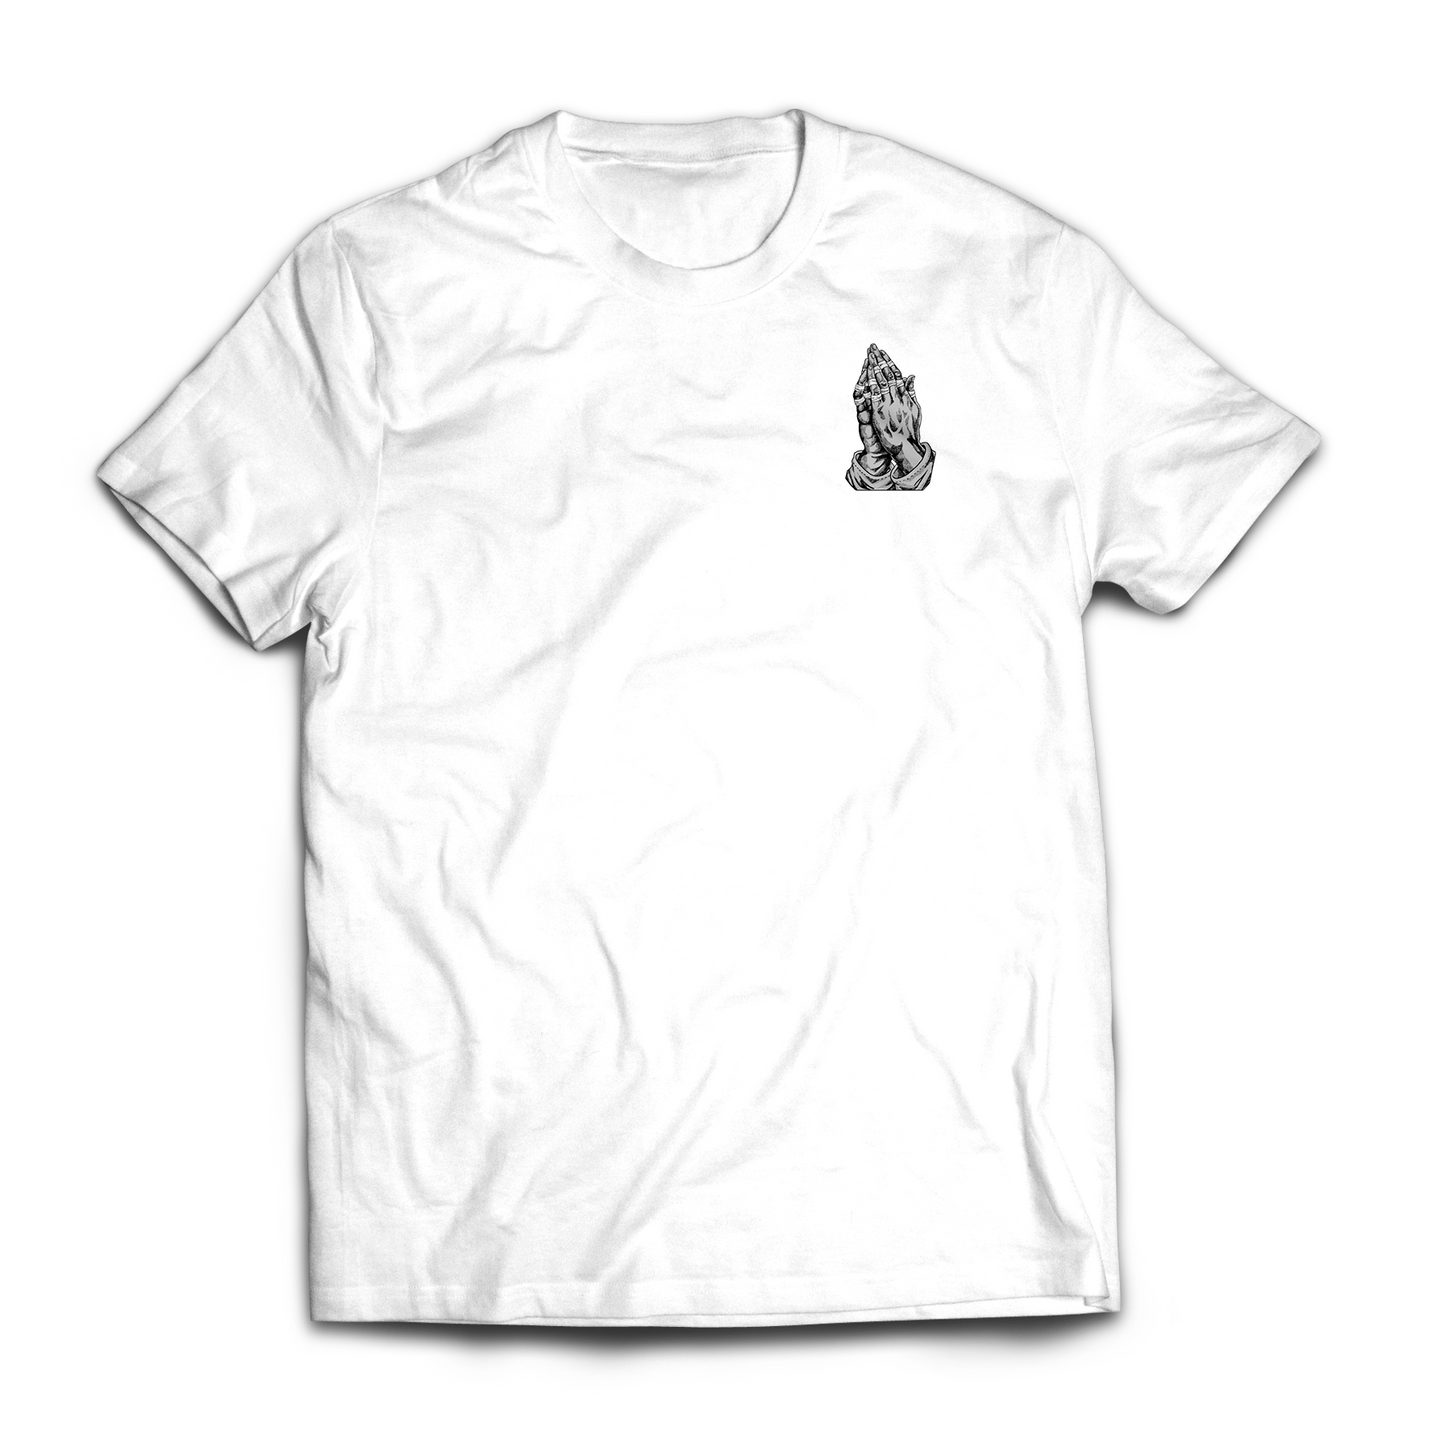 Combat Hands – Taped T-Shirt Club White Tested -